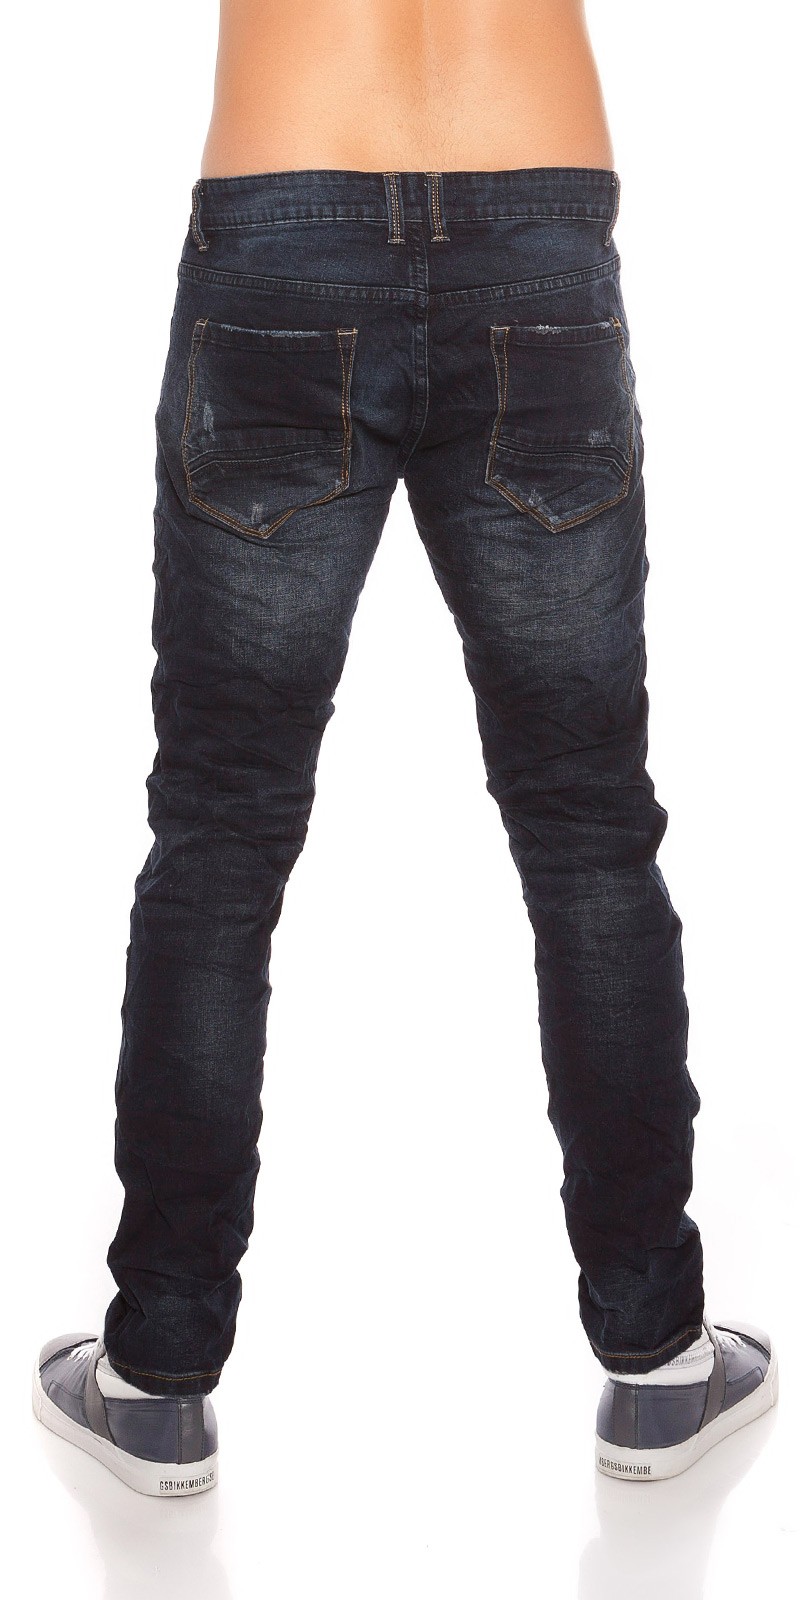 Jeans masculinos 6